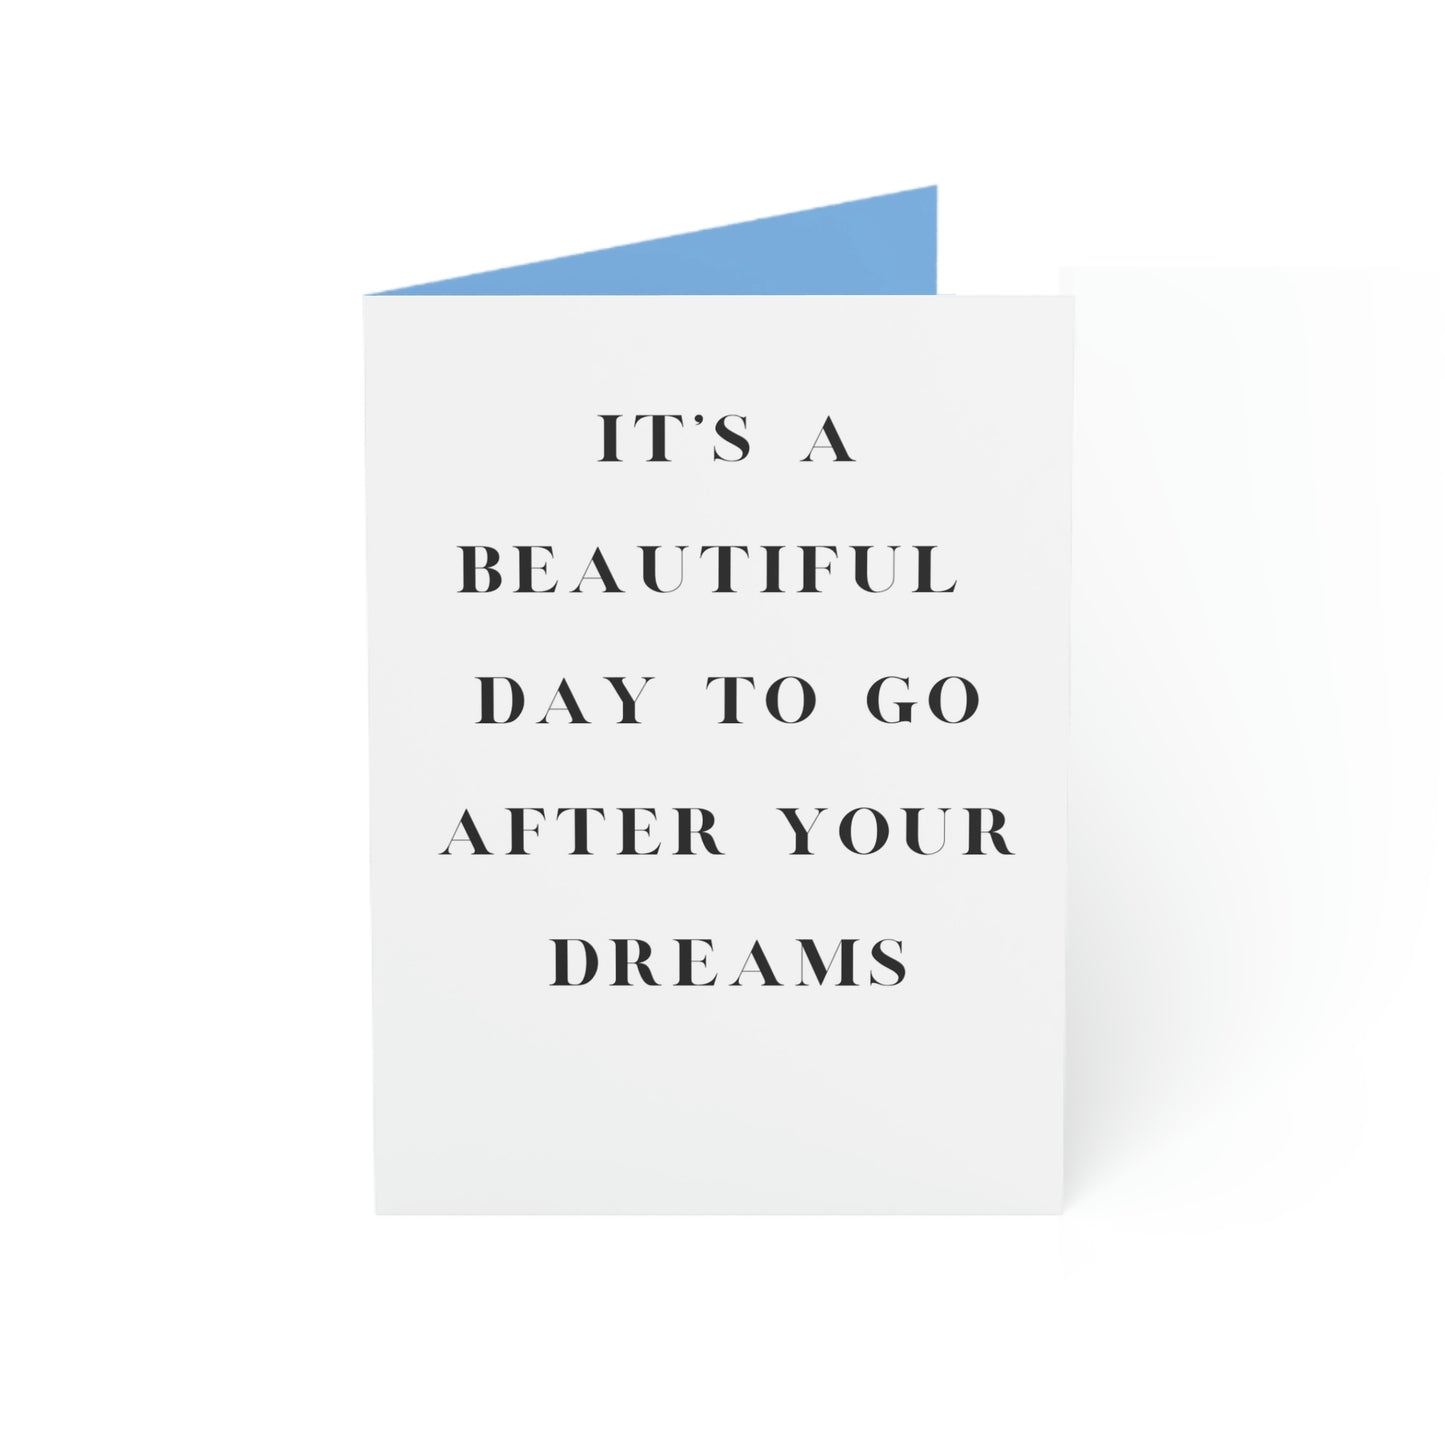 Inspire Empire || Greeting Cards || It's a beautiful day to go after your dreams!